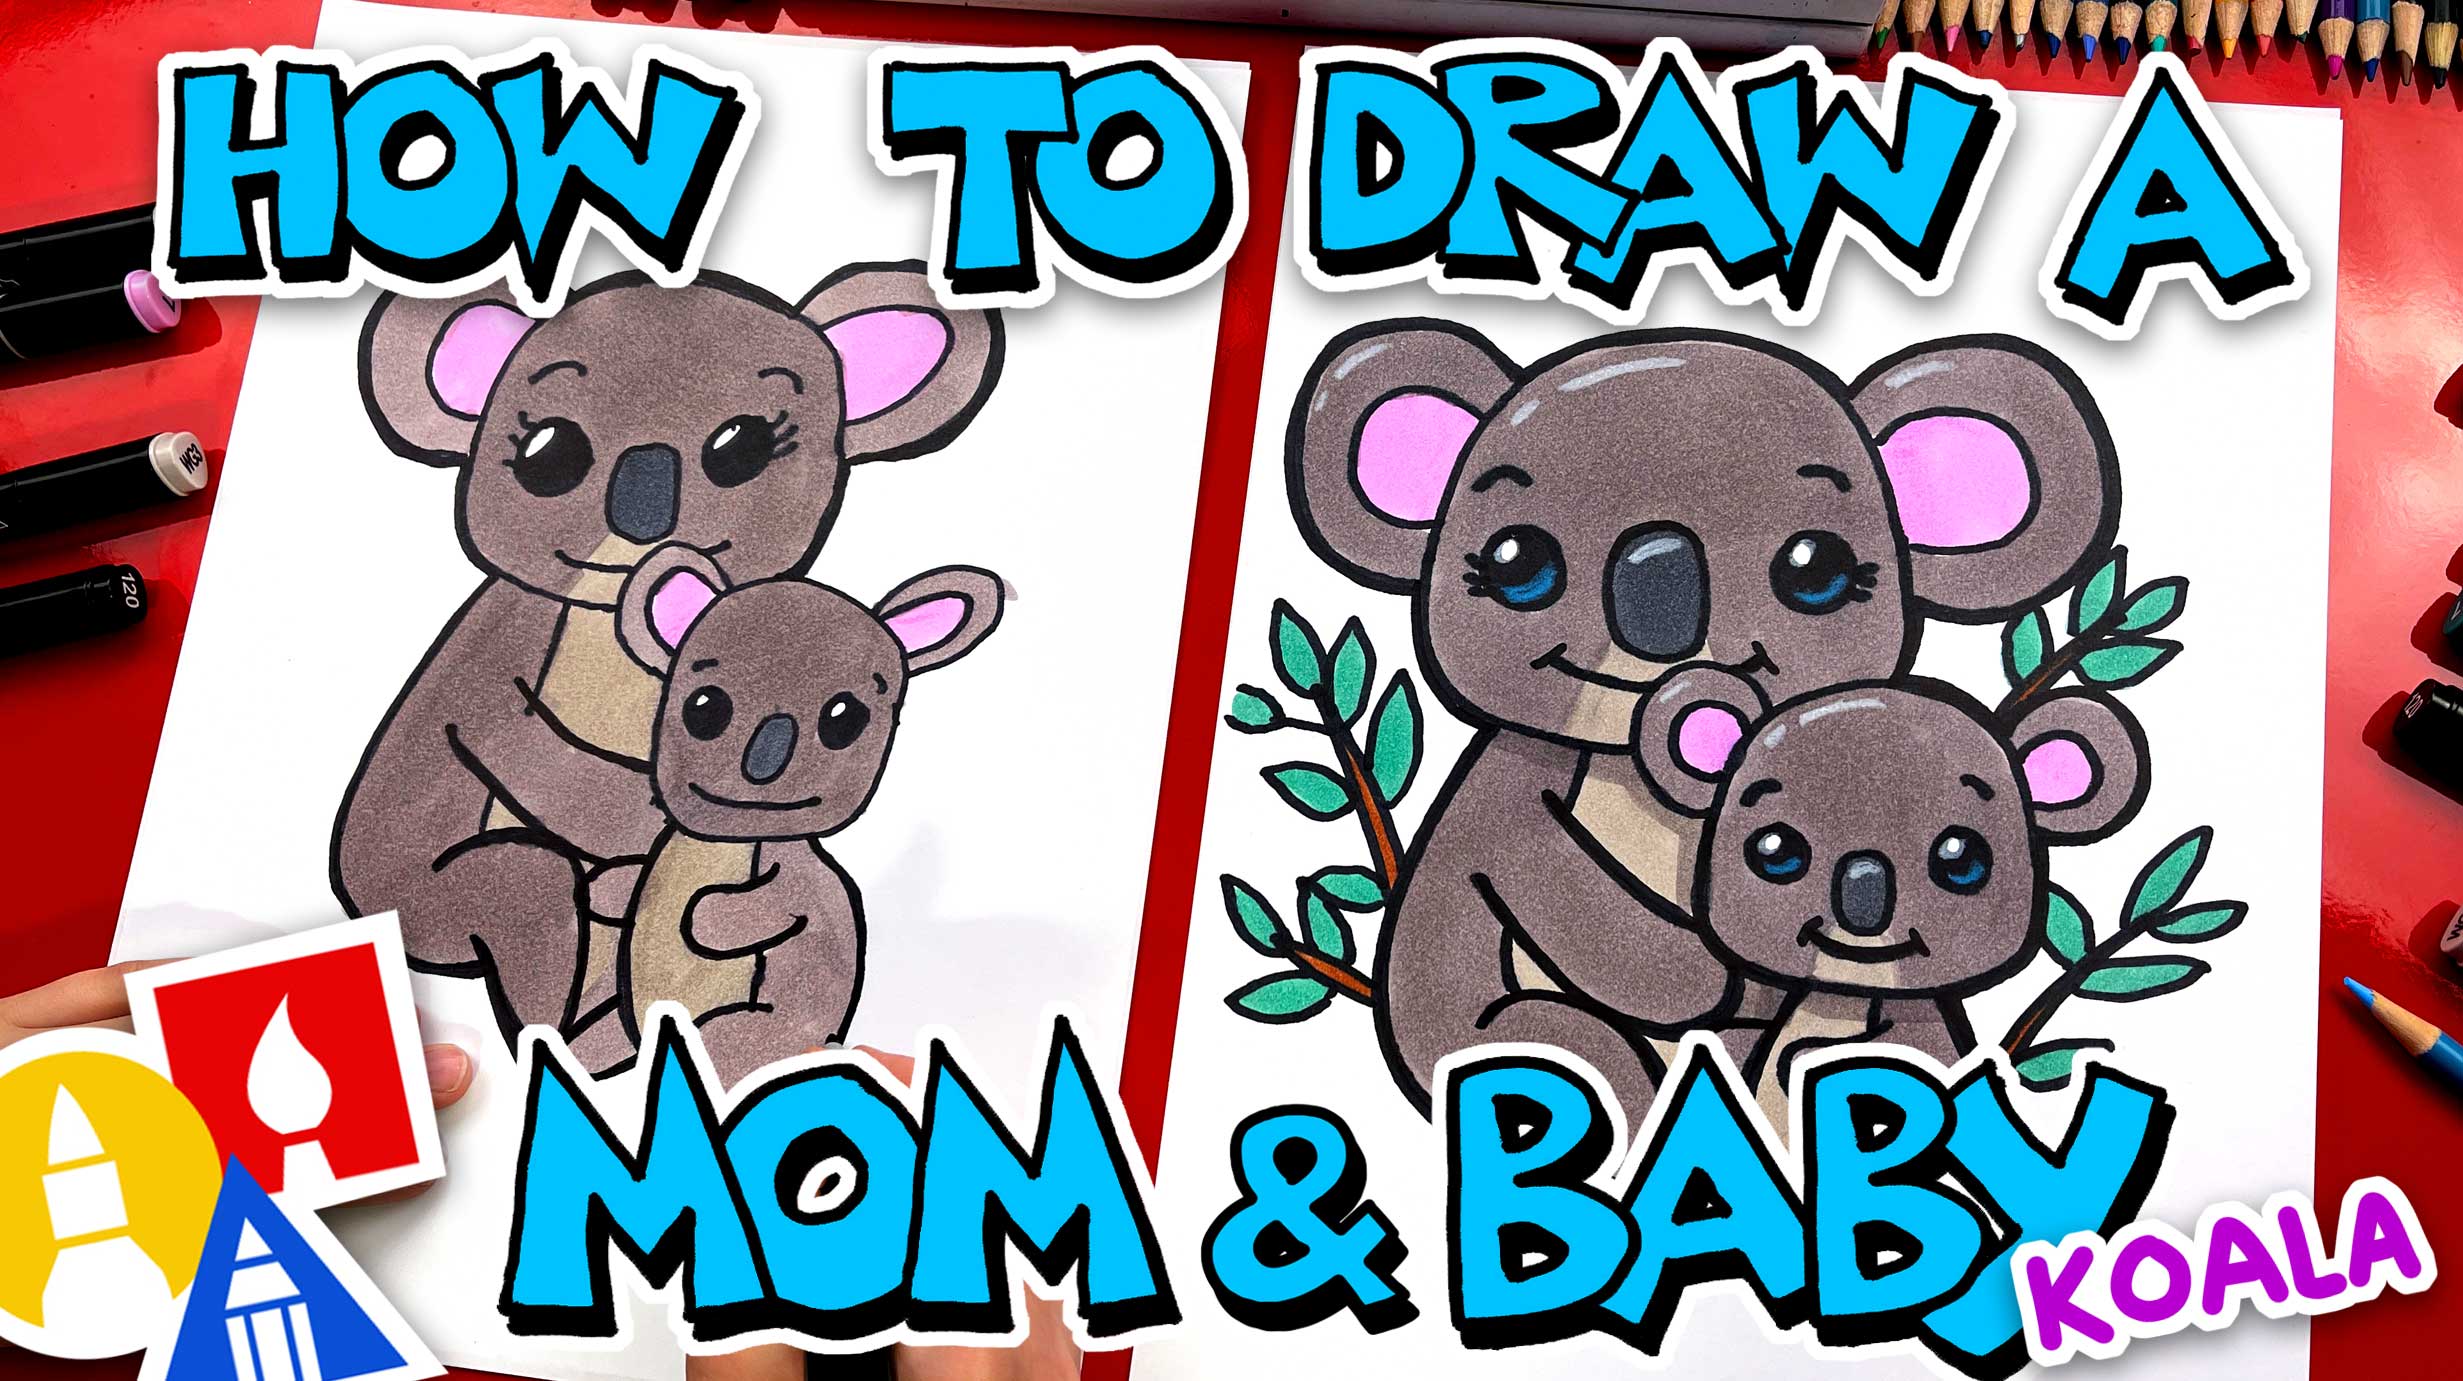 How to Draw a Crab Step By Step – For Kids & Beginners